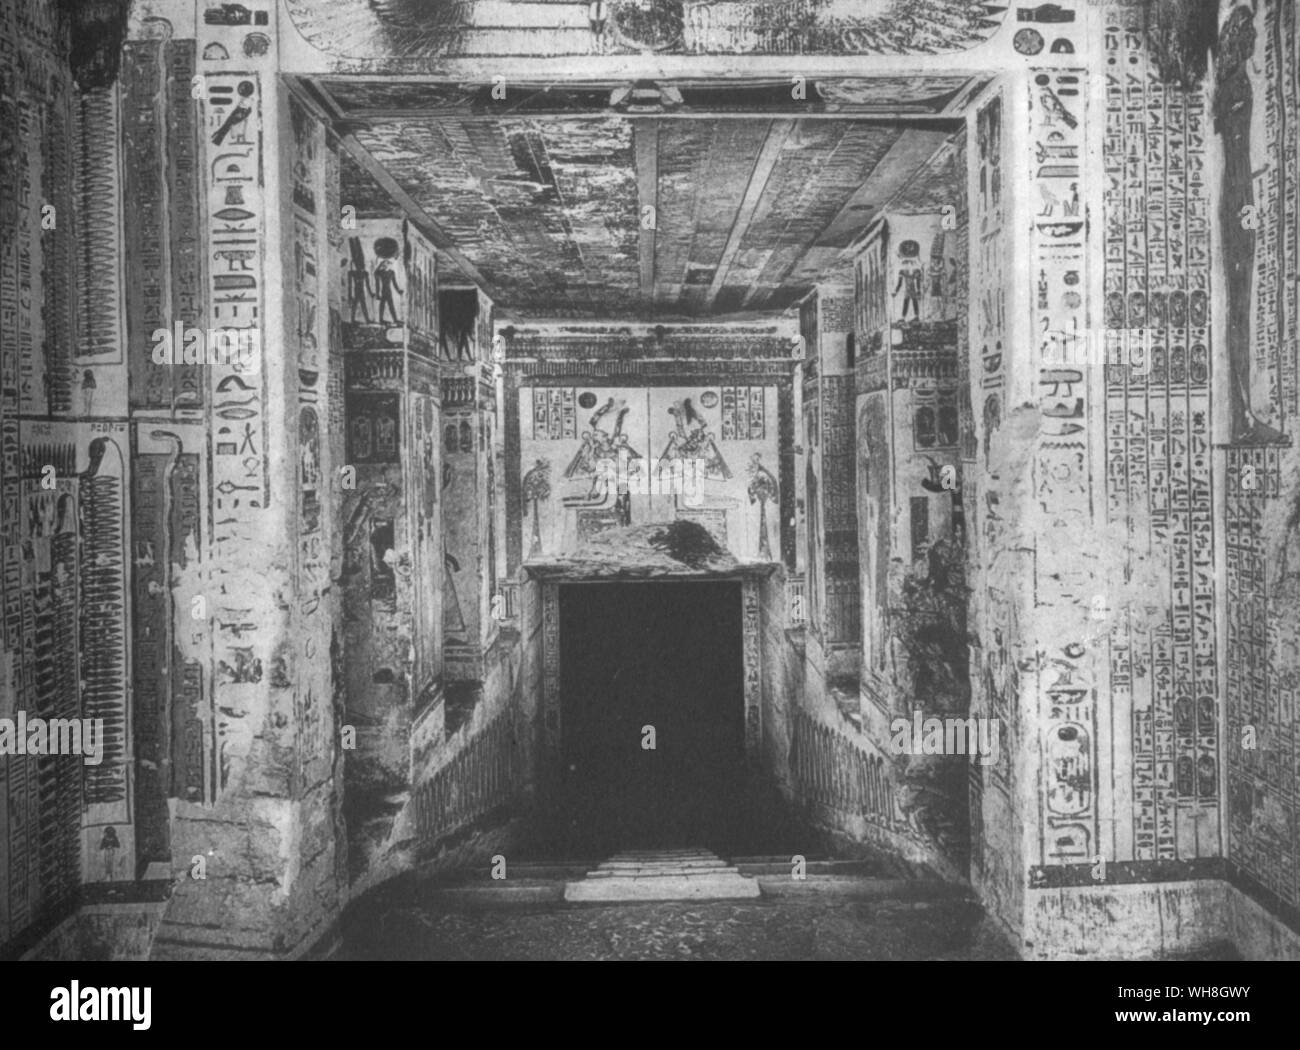 The entry to the funeral chamber of Ramesses VI (reigned 1142-1134 BC) in the Valley of the Kings. From Tutankhamen by Christiane Desroches Noblecourt, page 61. Stock Photo